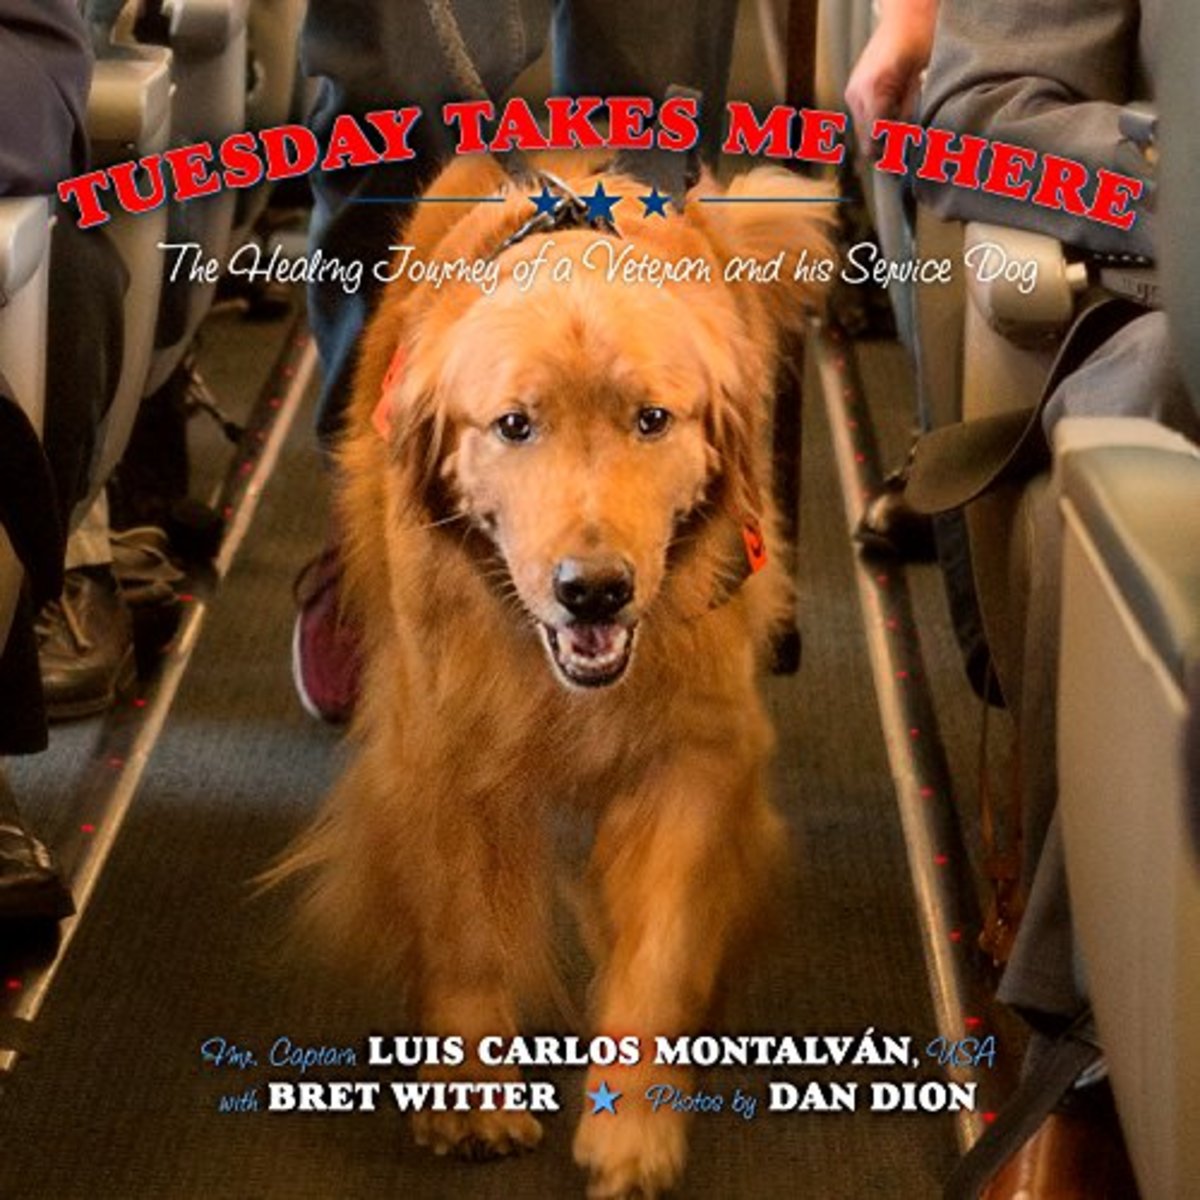 Tuesday Takes Me There: The Healing Journey of a Veteran and His Service Dog by Luis Carlos Montalvan